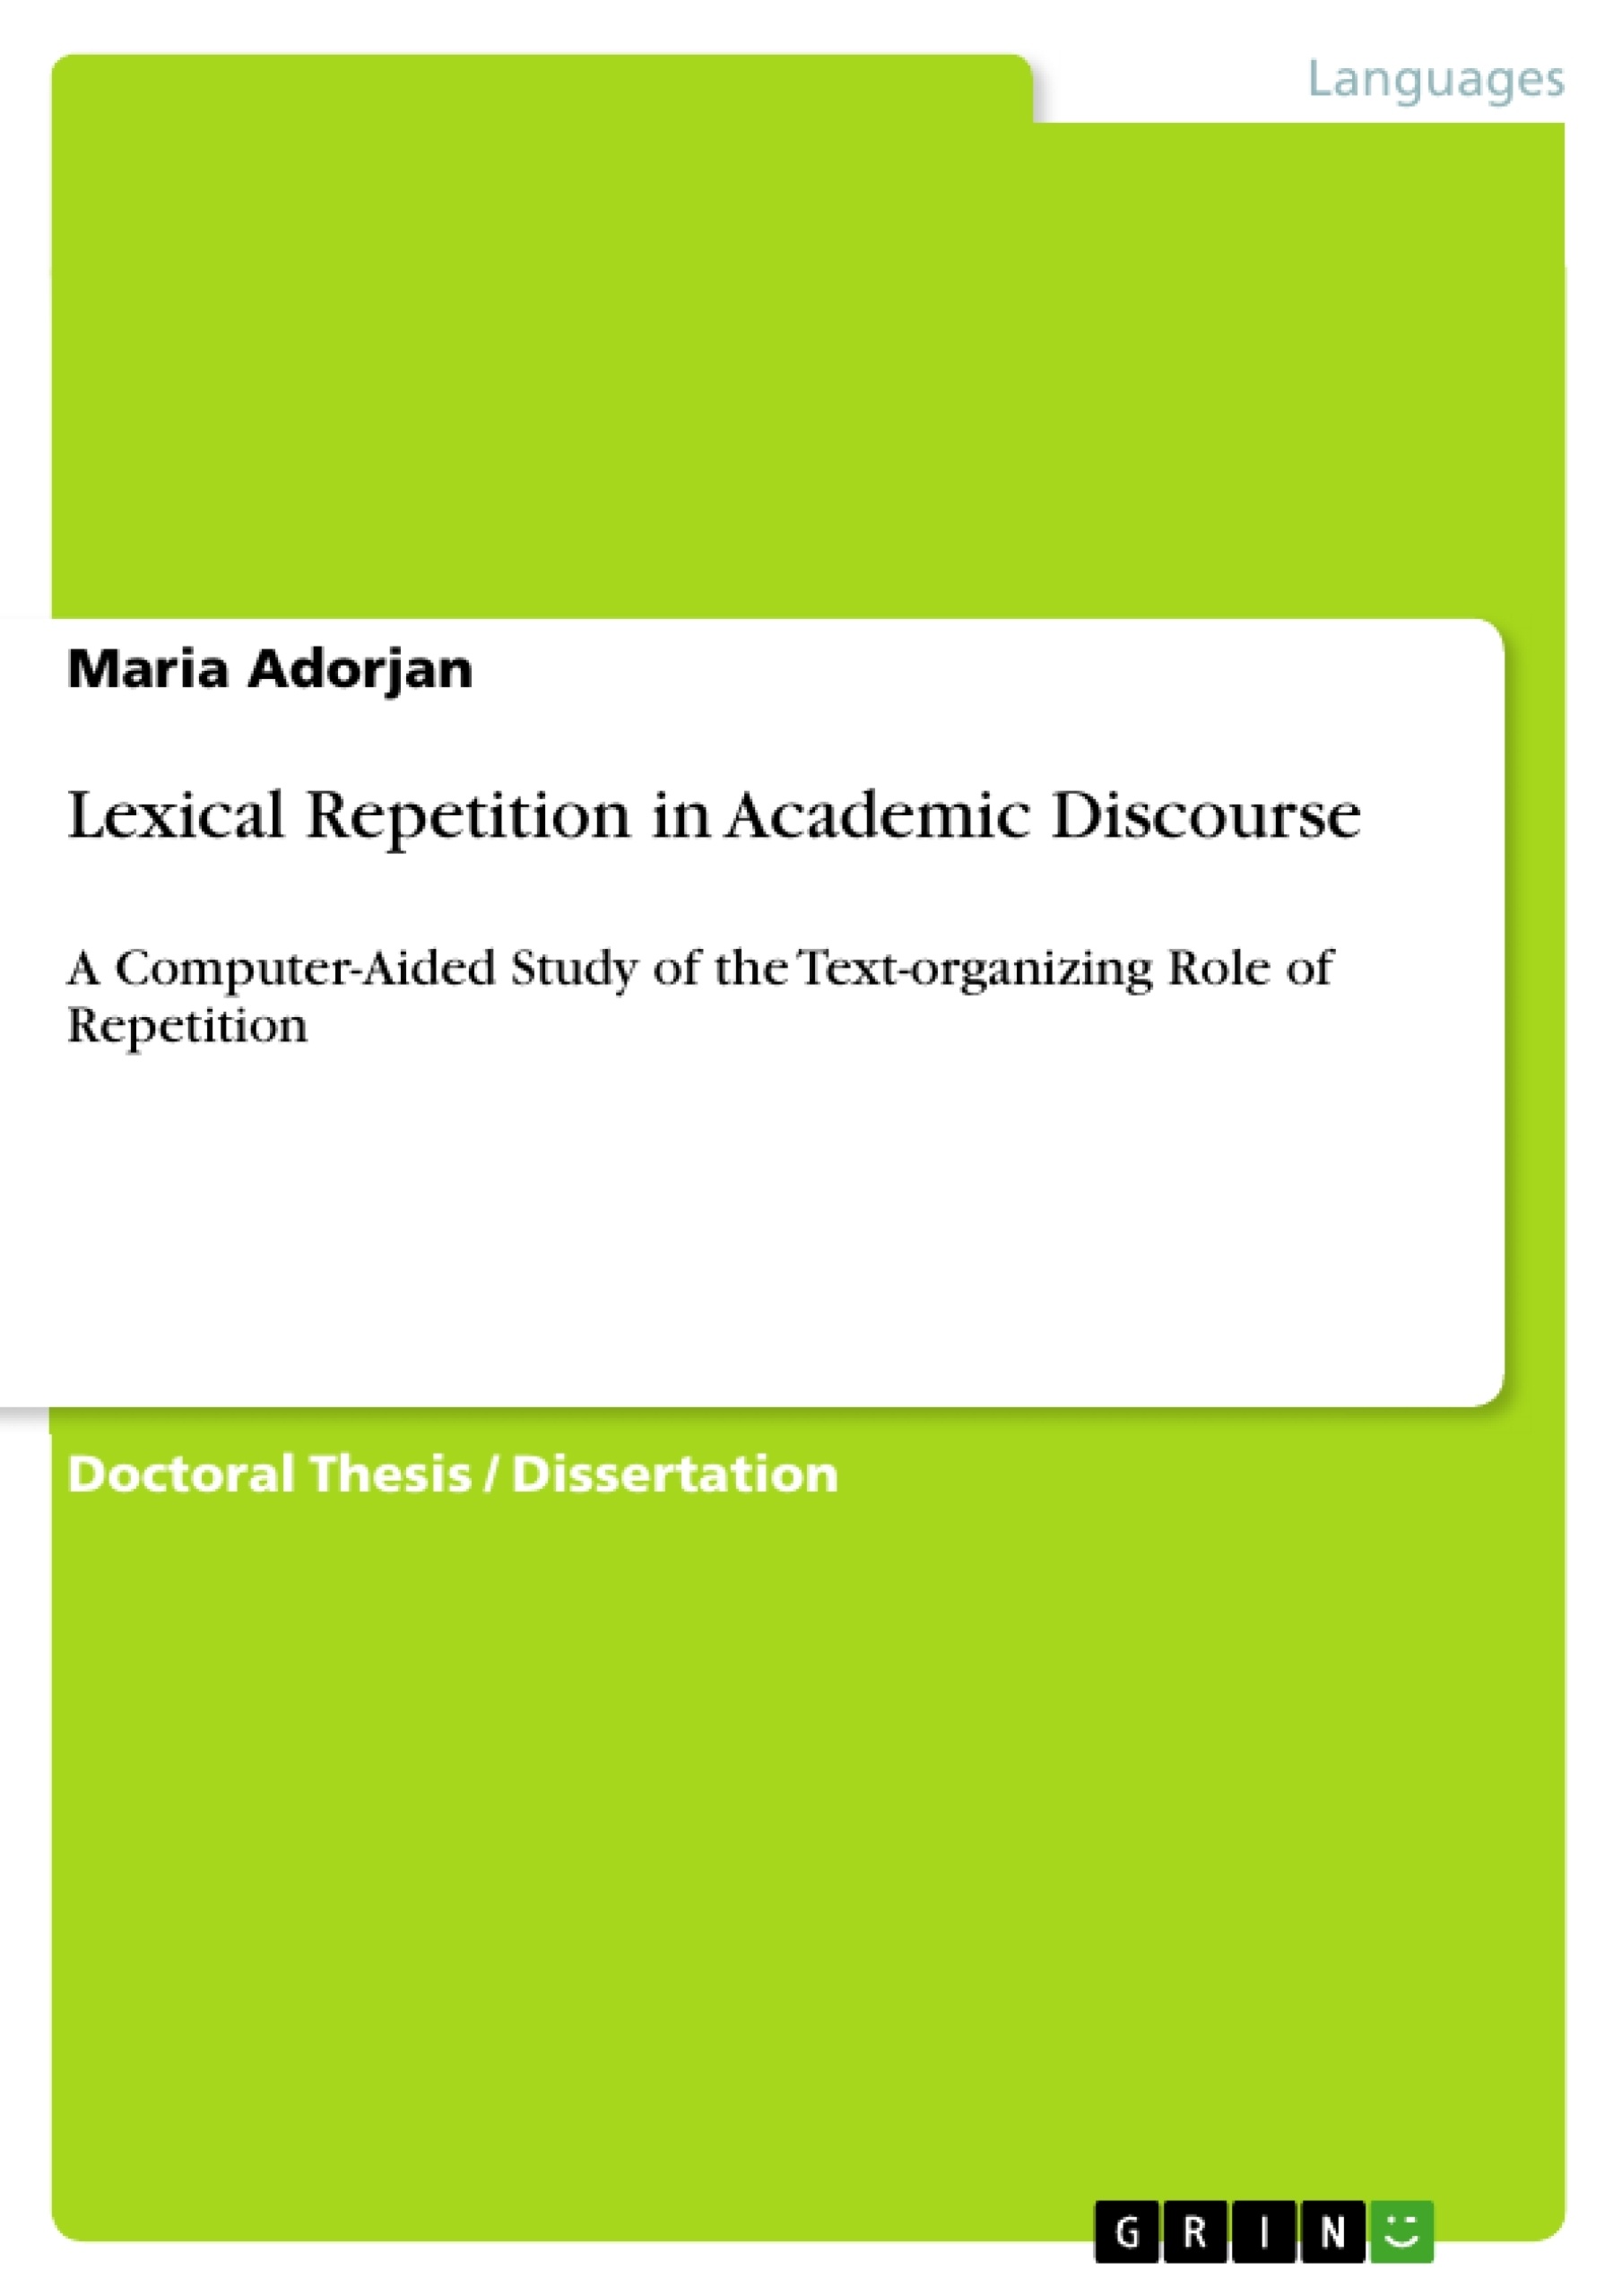 Title: Lexical Repetition in Academic Discourse